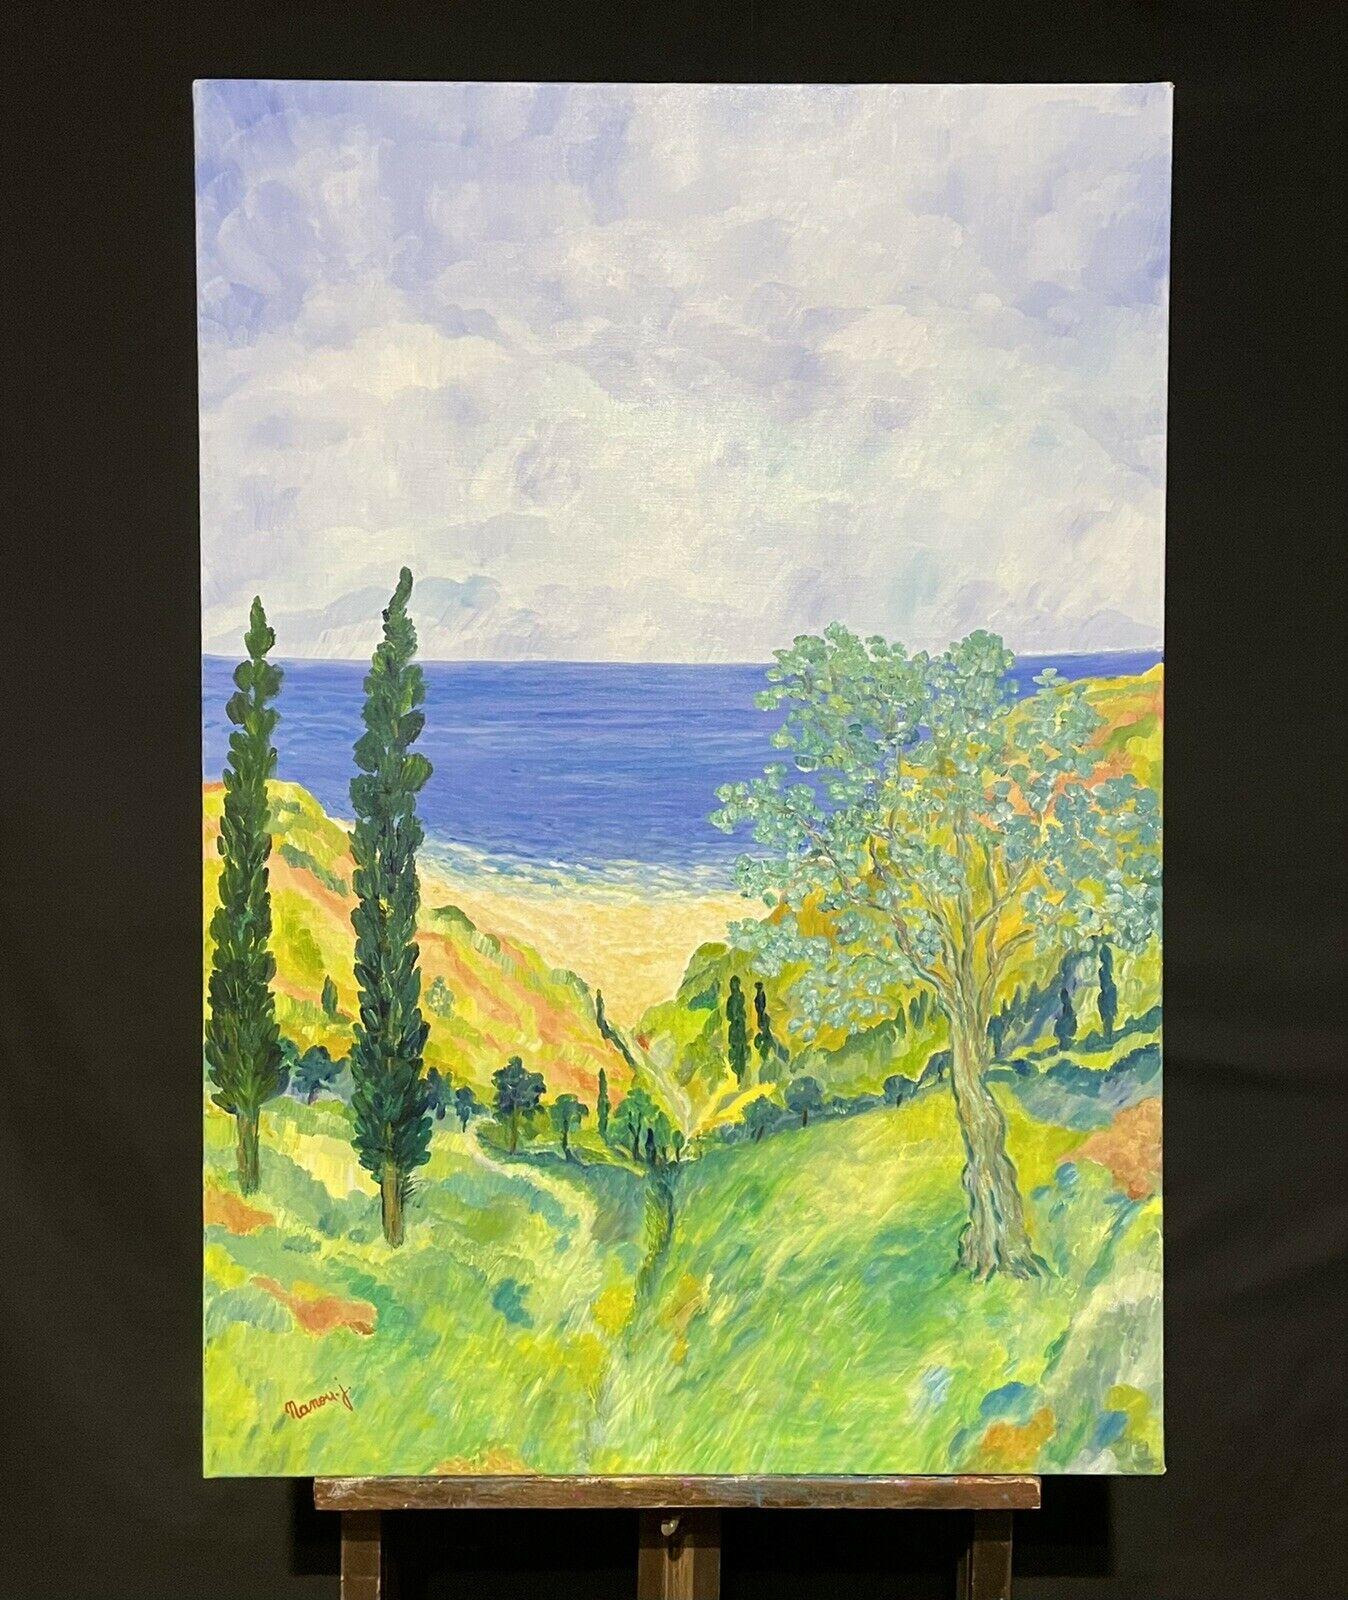 HUGE 20TH CENTURY FRENCH IMPRESSIONIST SIGNED OIL - COTE D'AZUR PROVENCE VIEWS - Painting by Unknown